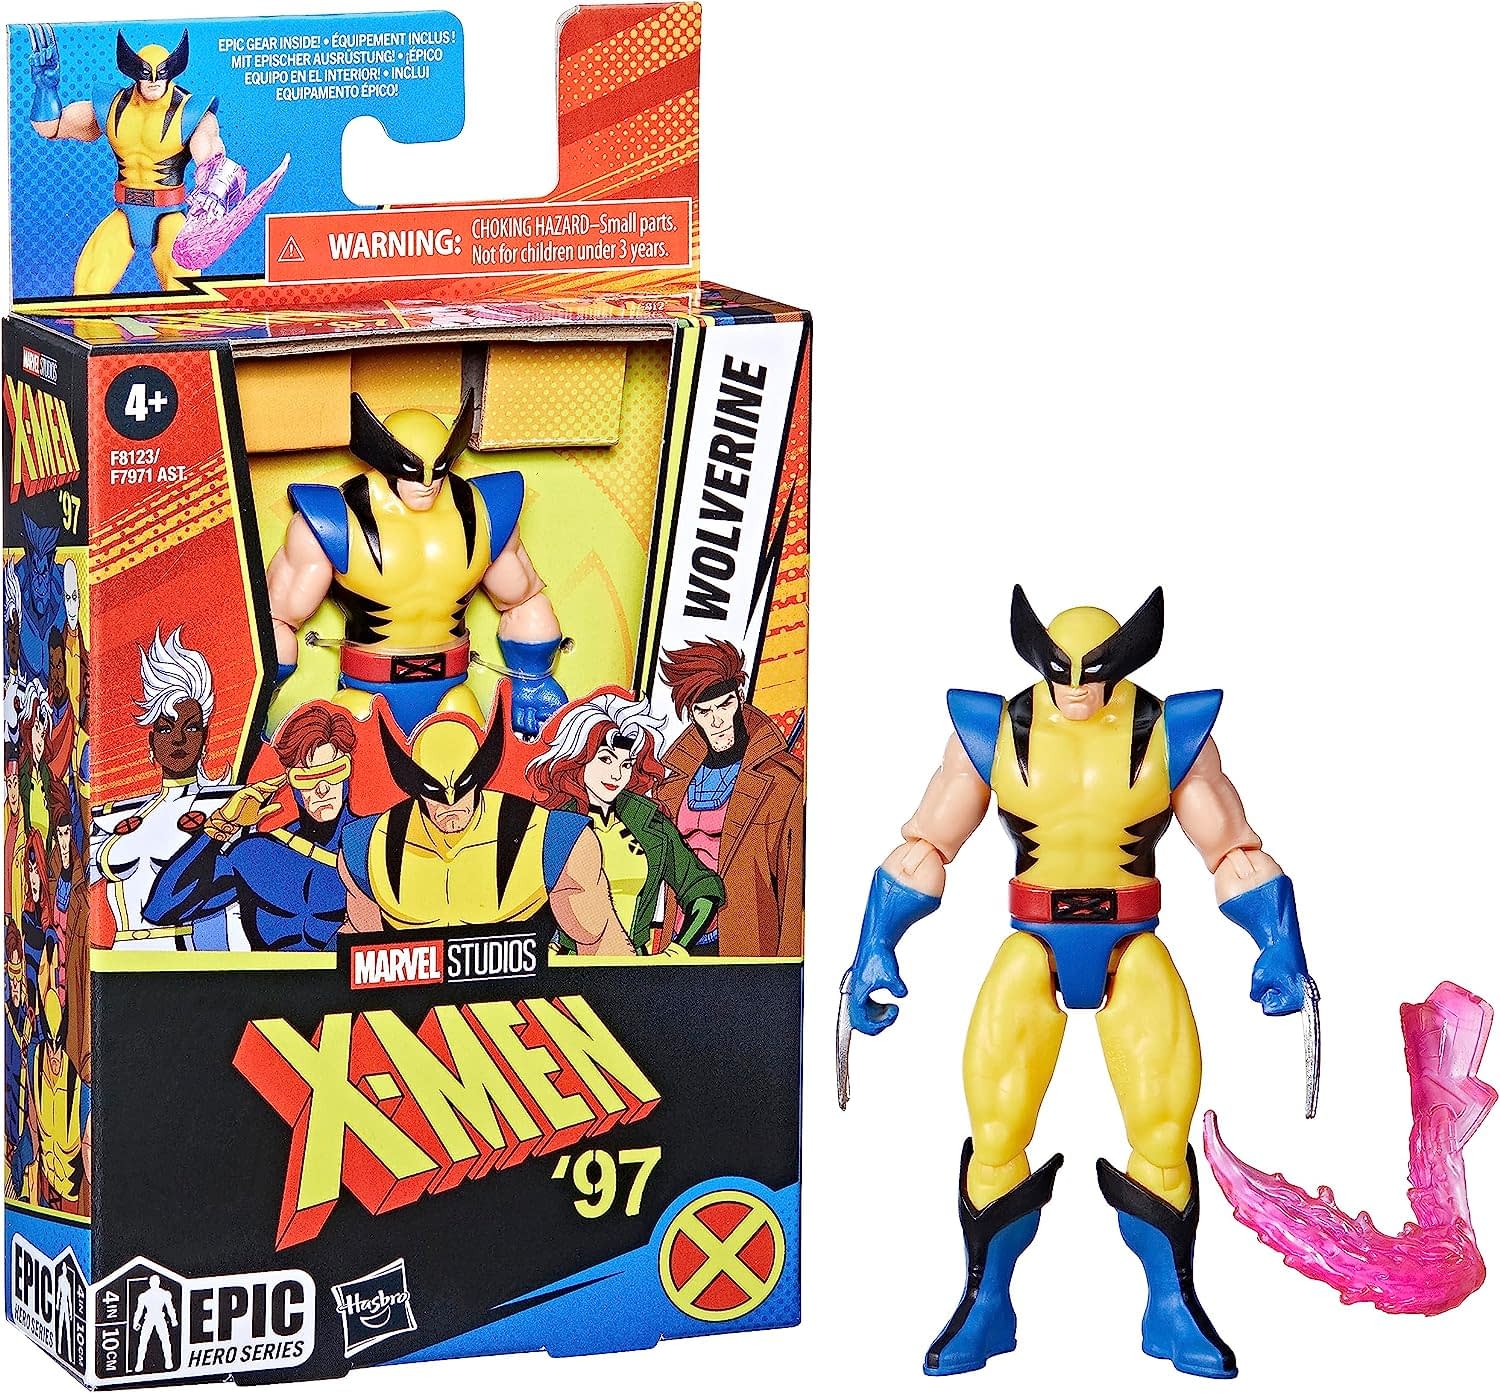 New Wolverine Collectibles Revealed From Hasbro For X Men Cartoon